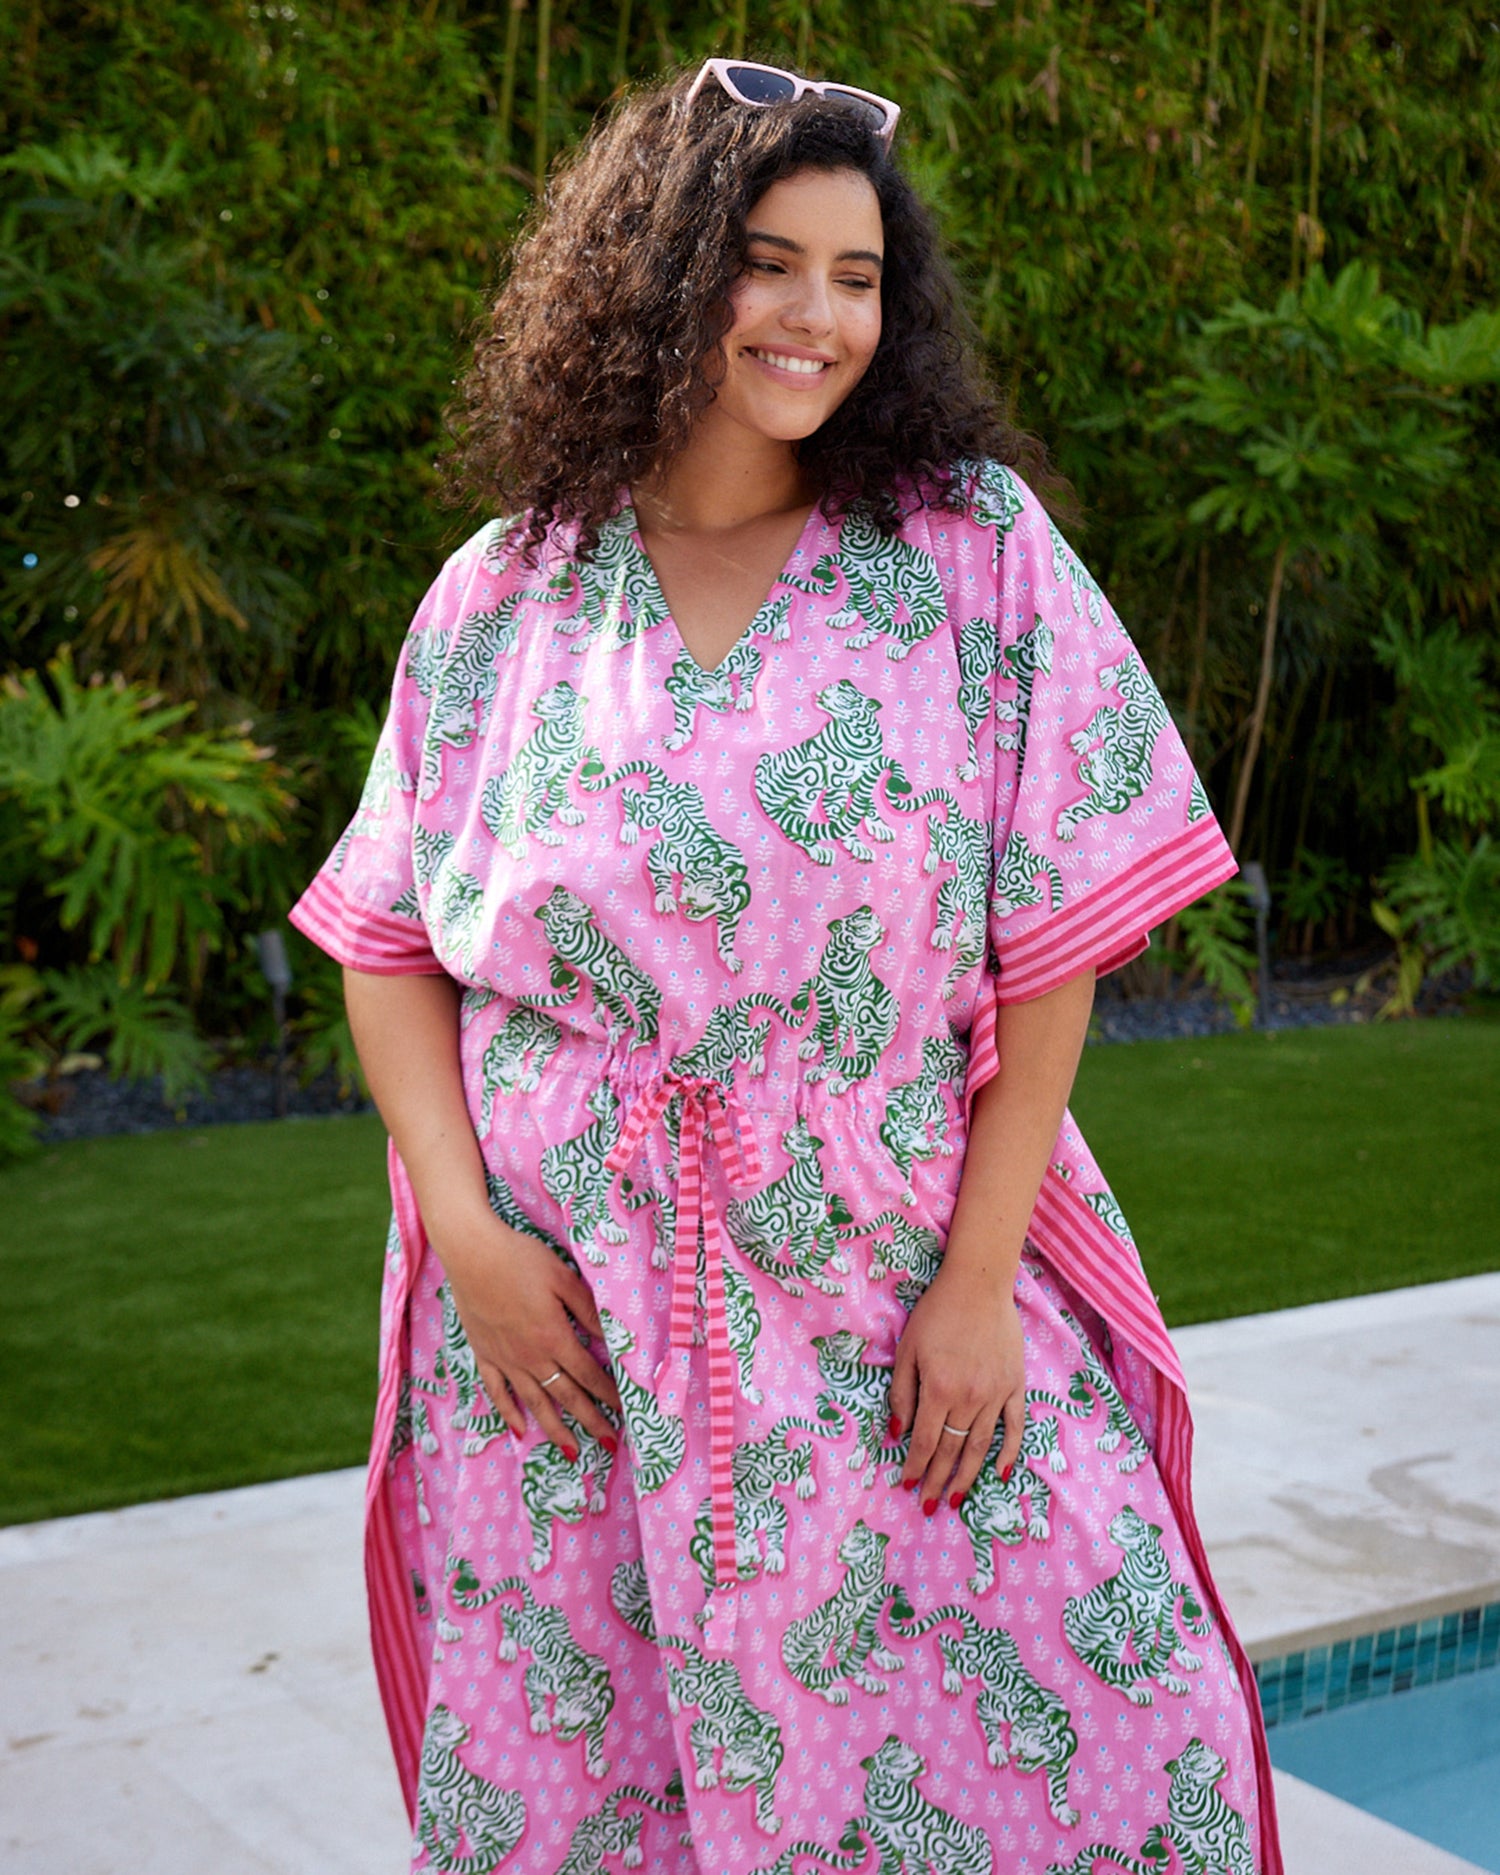 PF + Lime Ricki Tiger Queen - Let's Cruise Caftan - Pink Limo - Printfresh